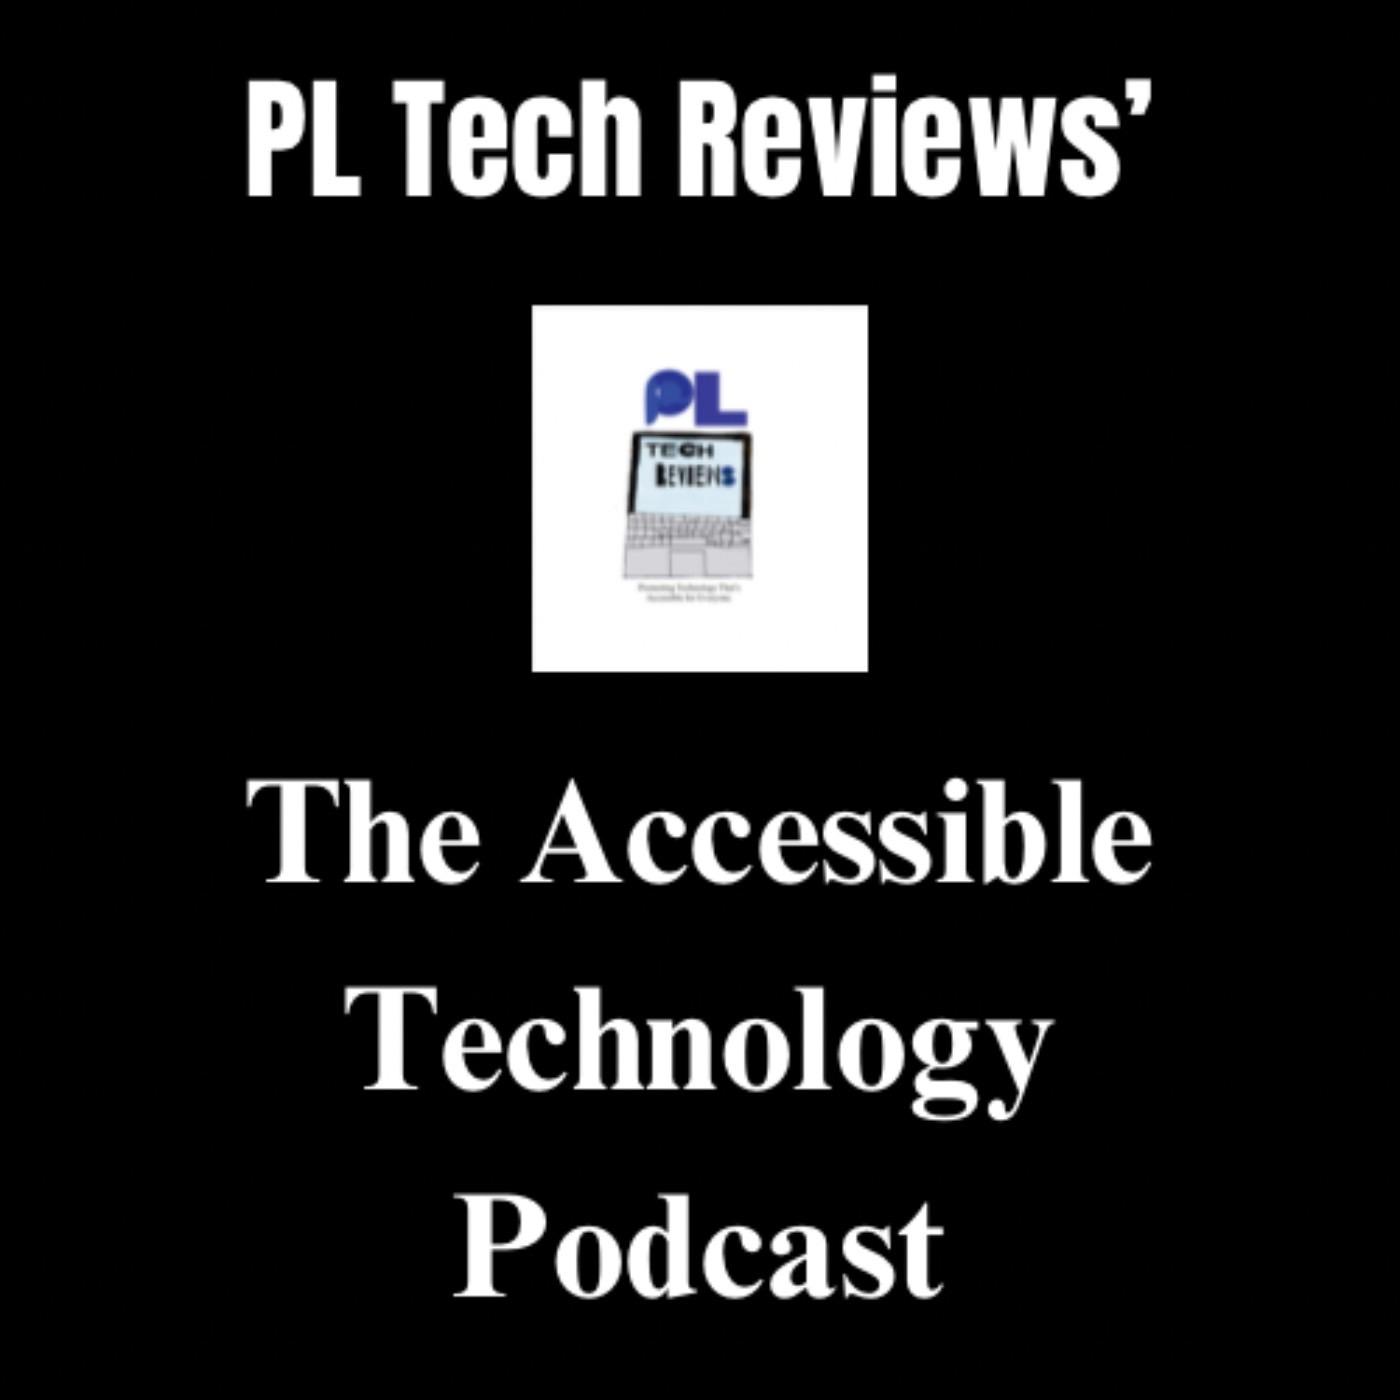 The Accessible Technology Podcast